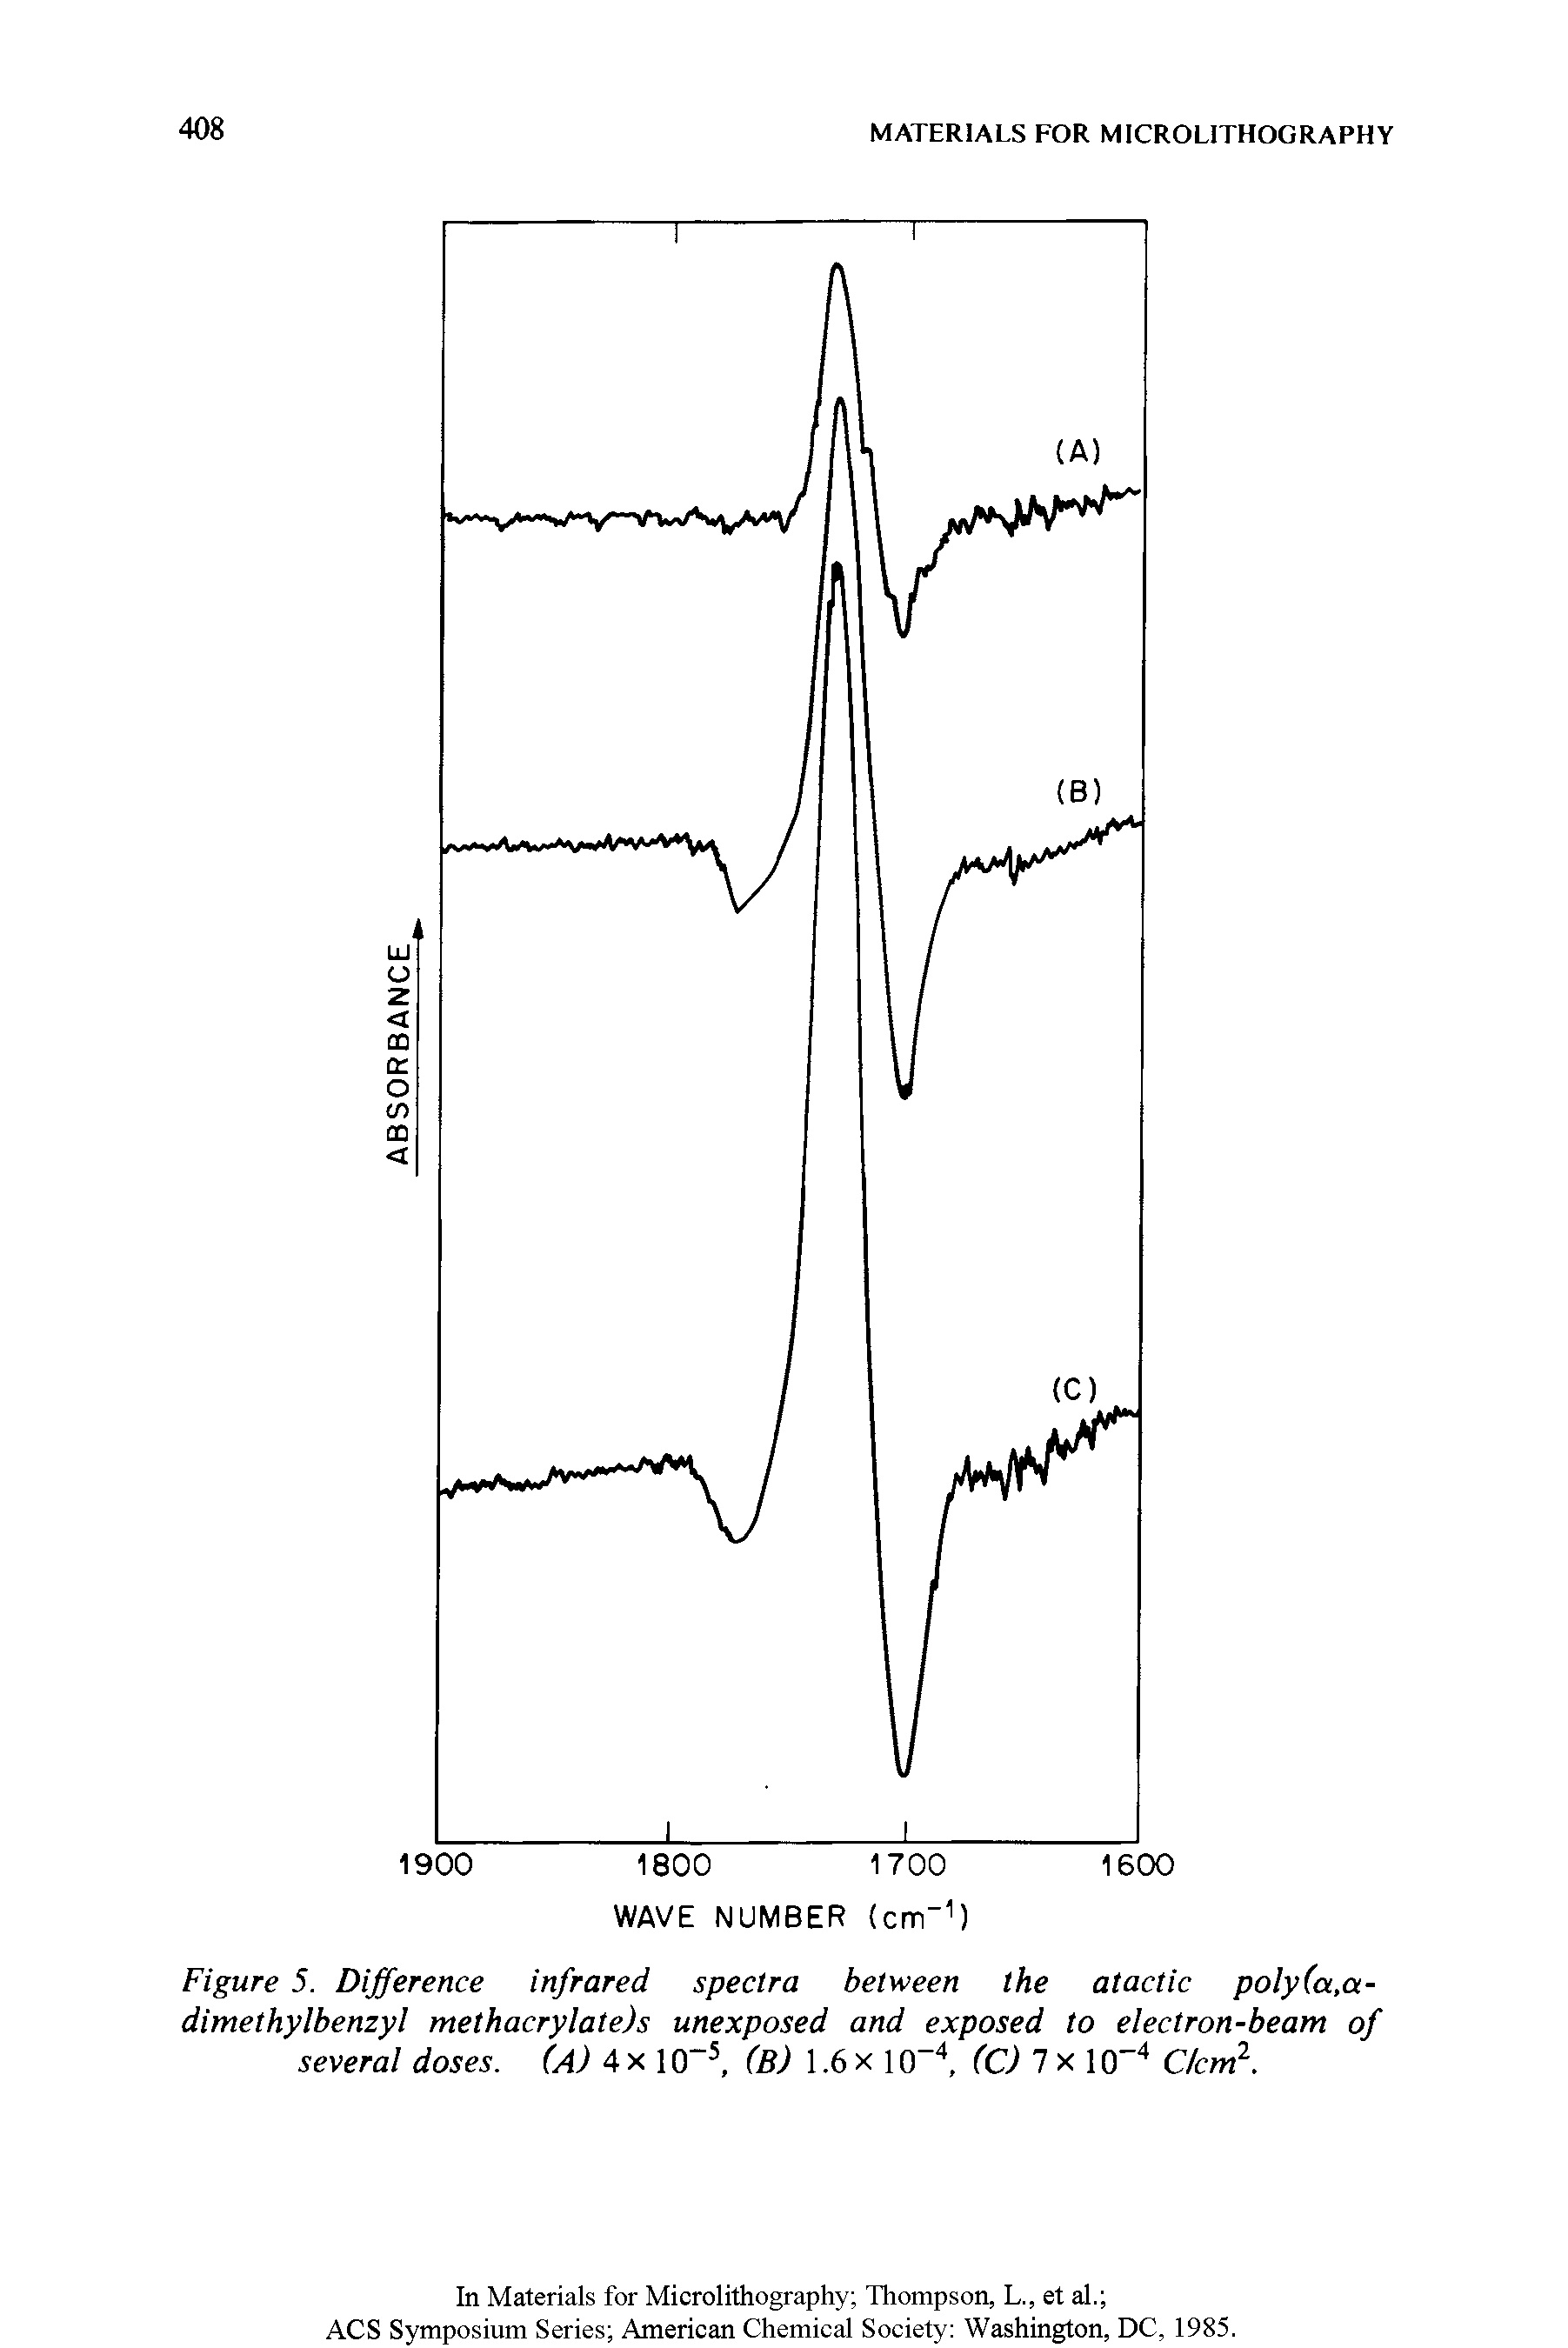 Figure 5. Difference infrared spectra between the atactic poly(a,a-dimethylbenzyl methacrylate)s unexposed and exposed to electron-beam of several doses. (A) 4x1 ( 5, (B) 1.6x1 0 4, (C) 7 x 1 ( 4 Clem1.